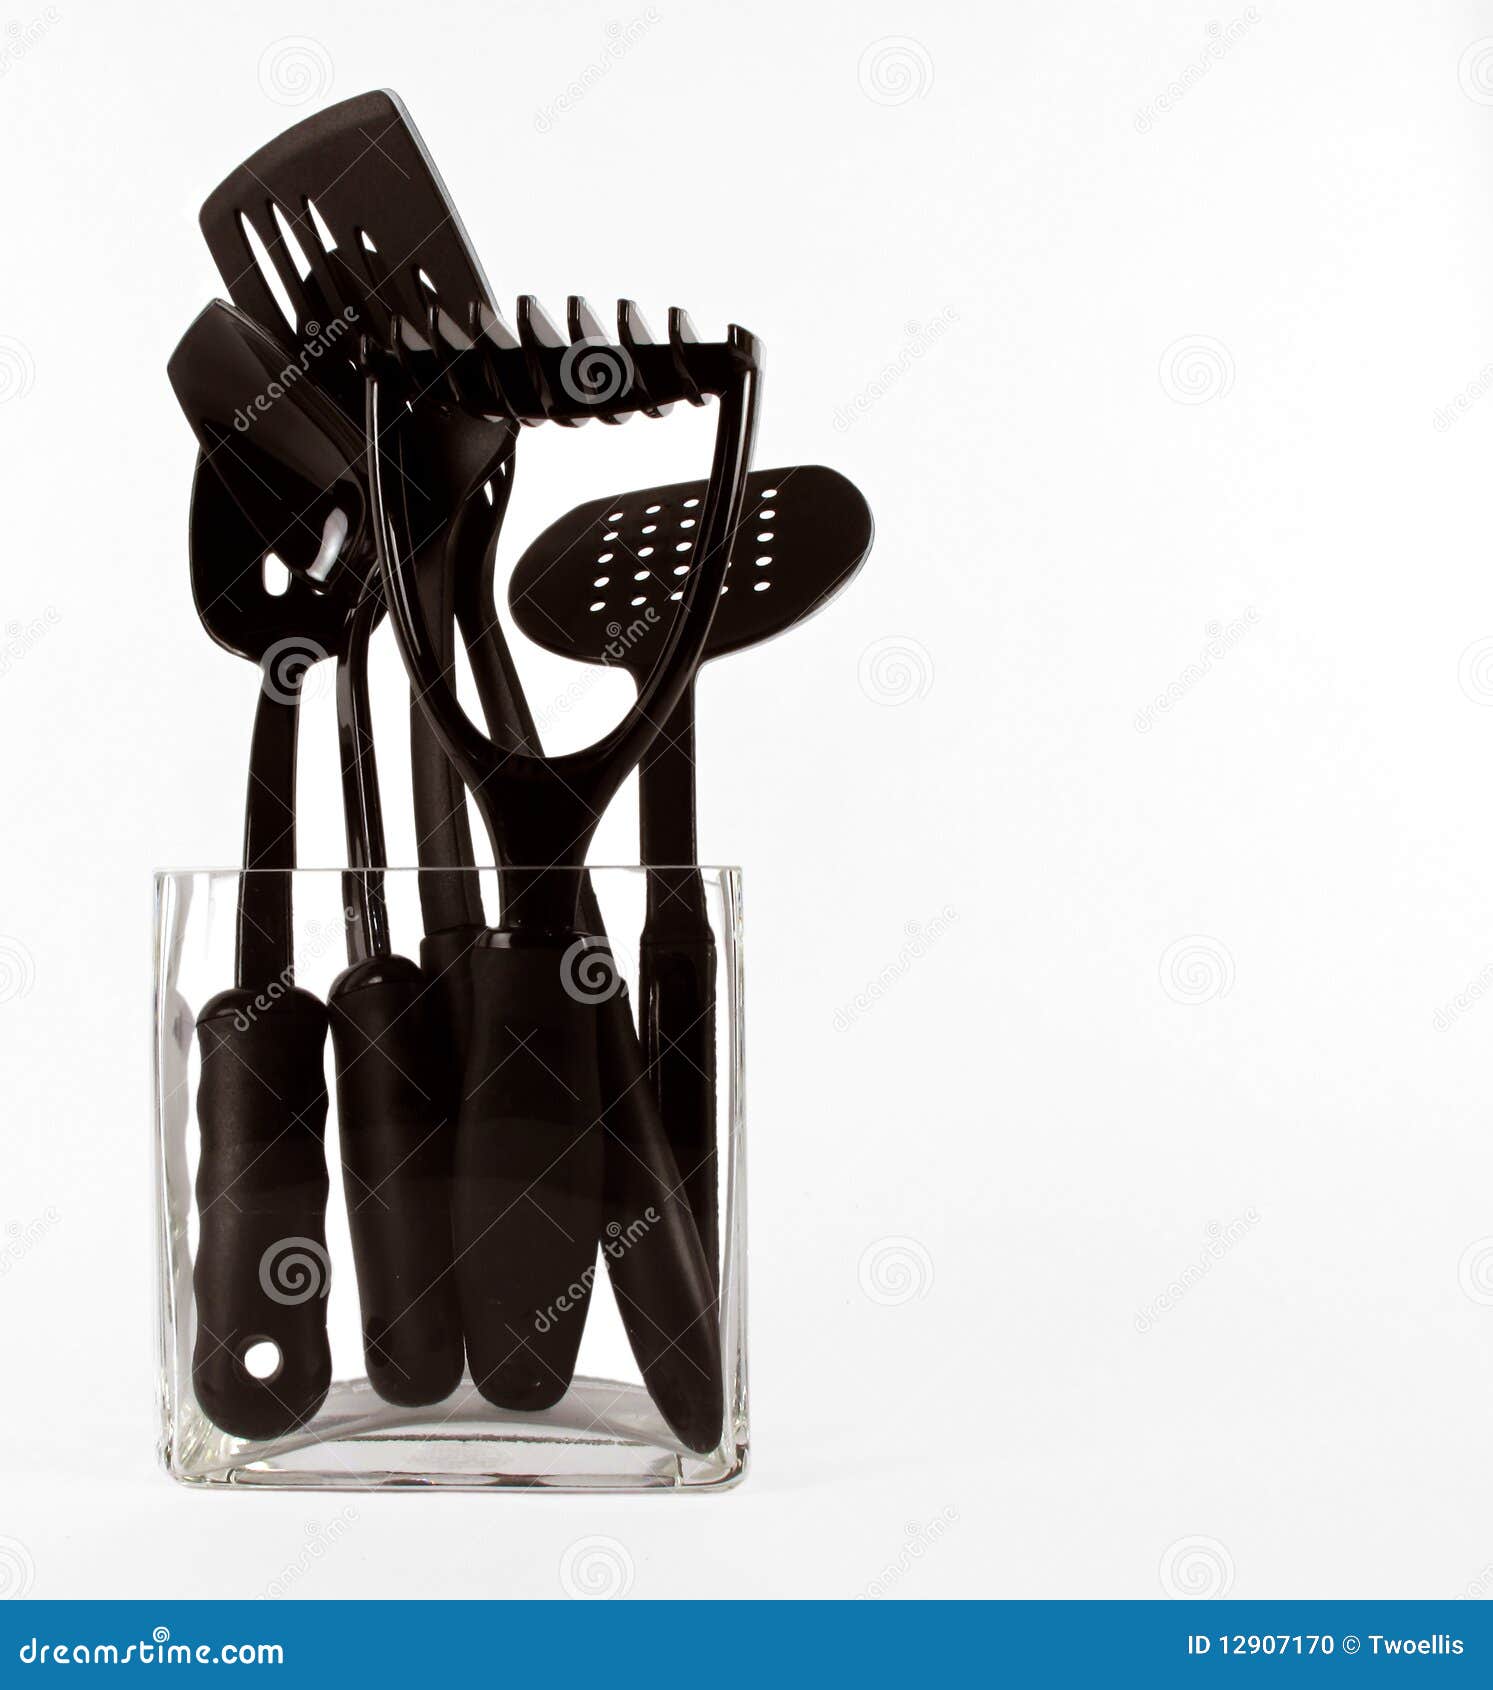 Contemporary black kitchen utensils in a clear glass vase on white.